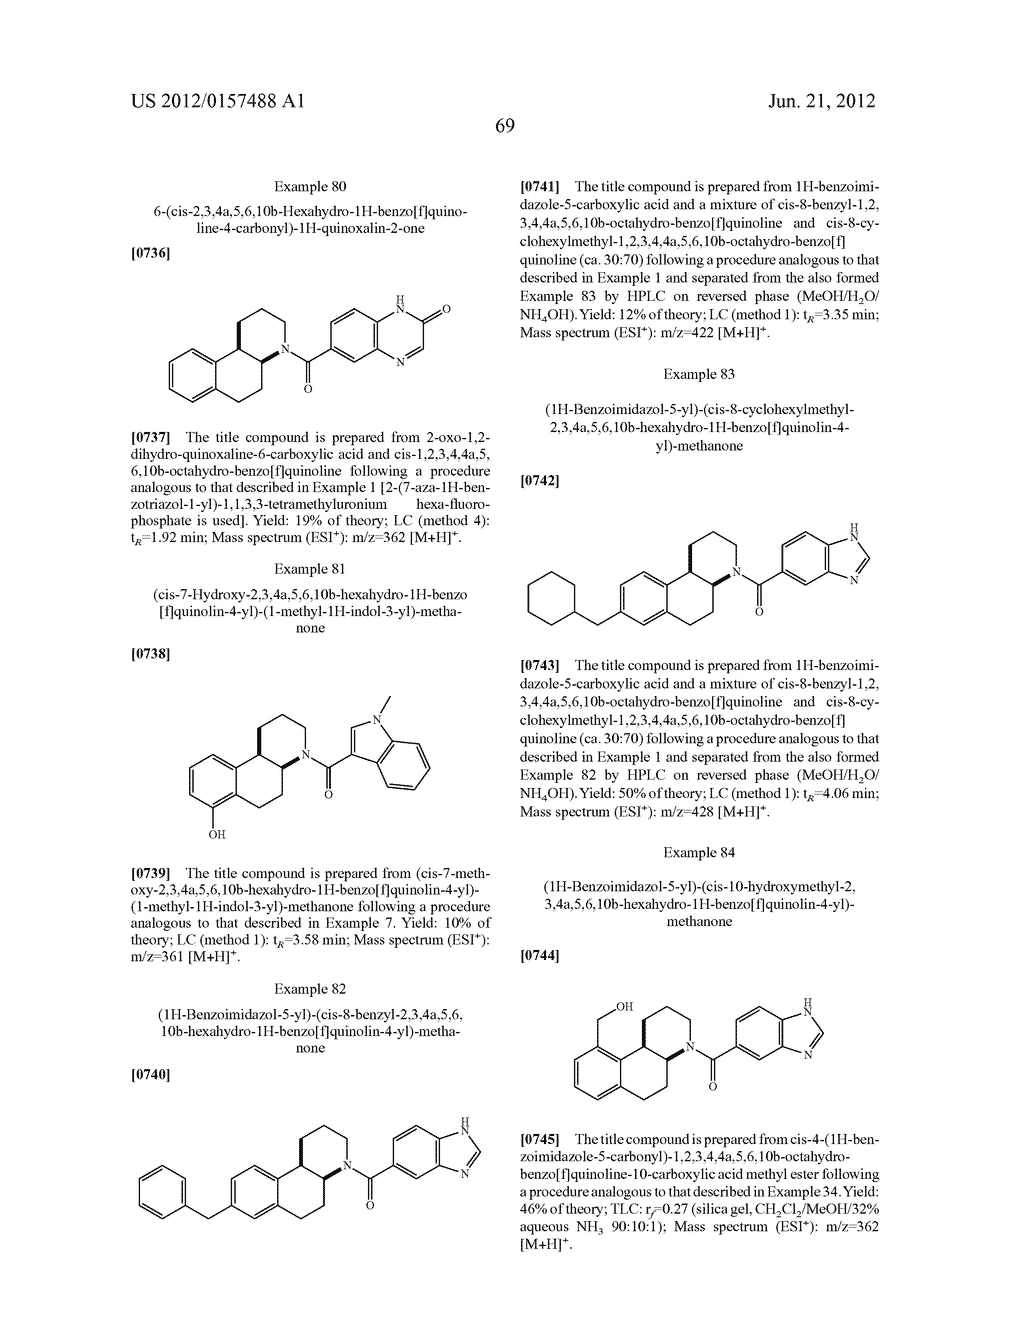 ARYL-AND HETEROARYLCARBONYL DERIVATIVES OF HEXAHYDROINDENOPYRIDINE AND     OCTAHYDROBENZOQUINOLINE - diagram, schematic, and image 78